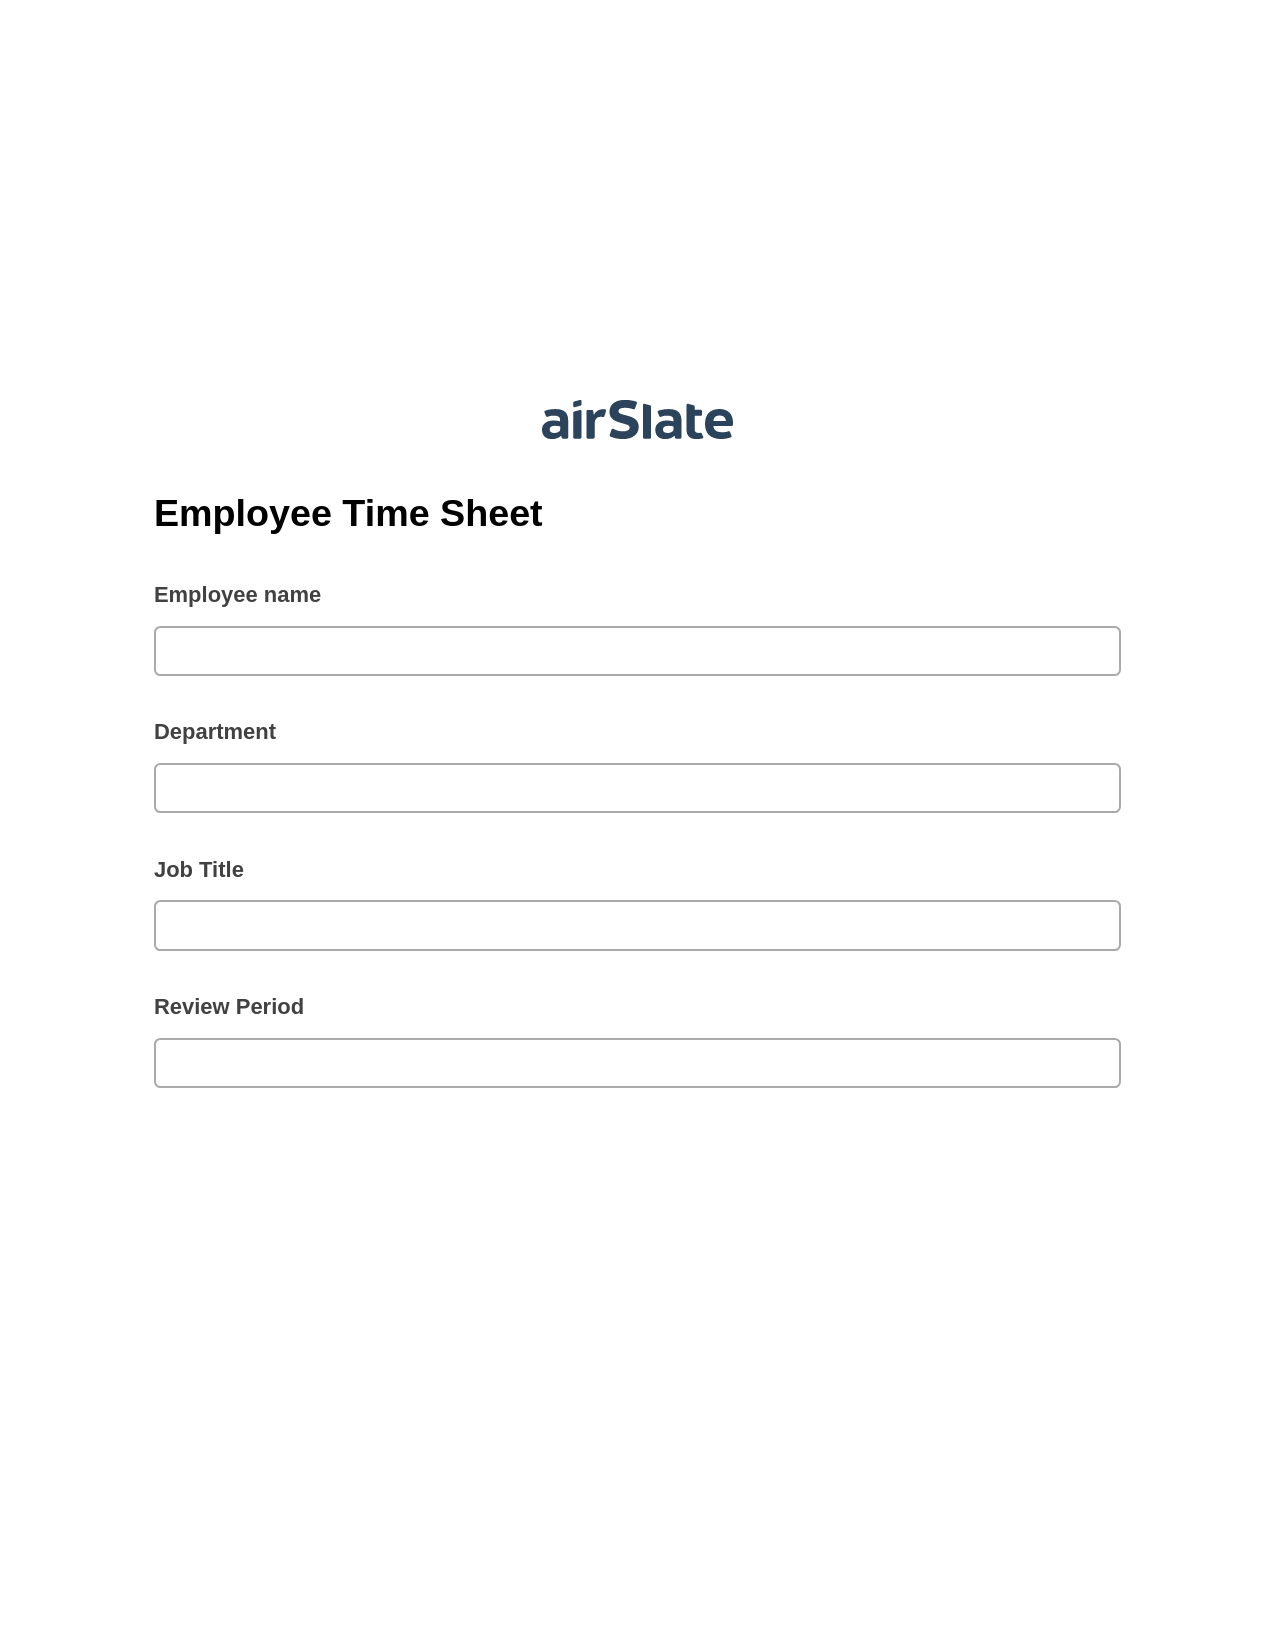 Multirole Employee Time Sheet Pre-fill Dropdowns from Airtable, Send a Slate with Roles Bot, Archive to Dropbox Bot